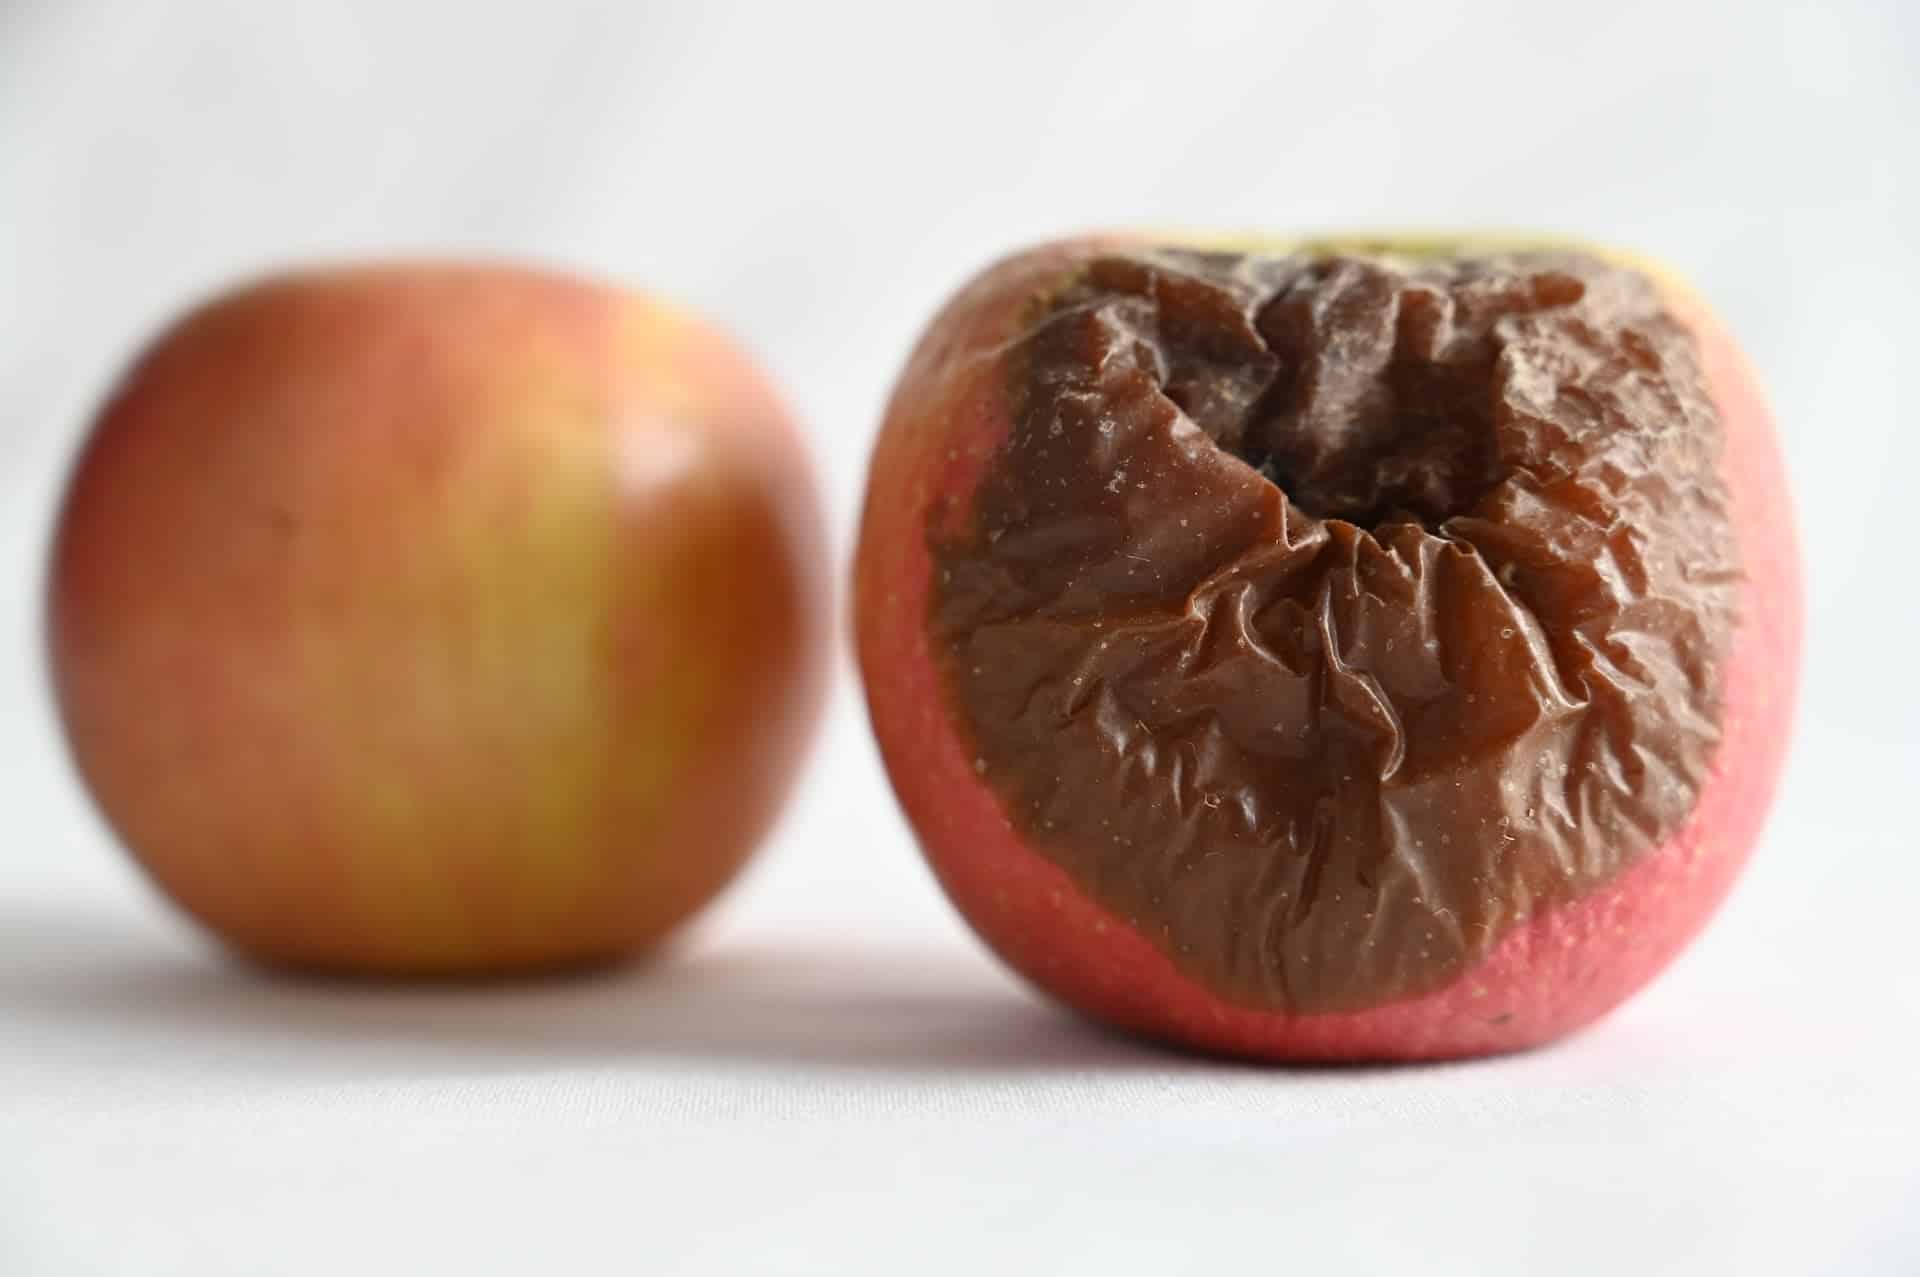 Apples and food preservative